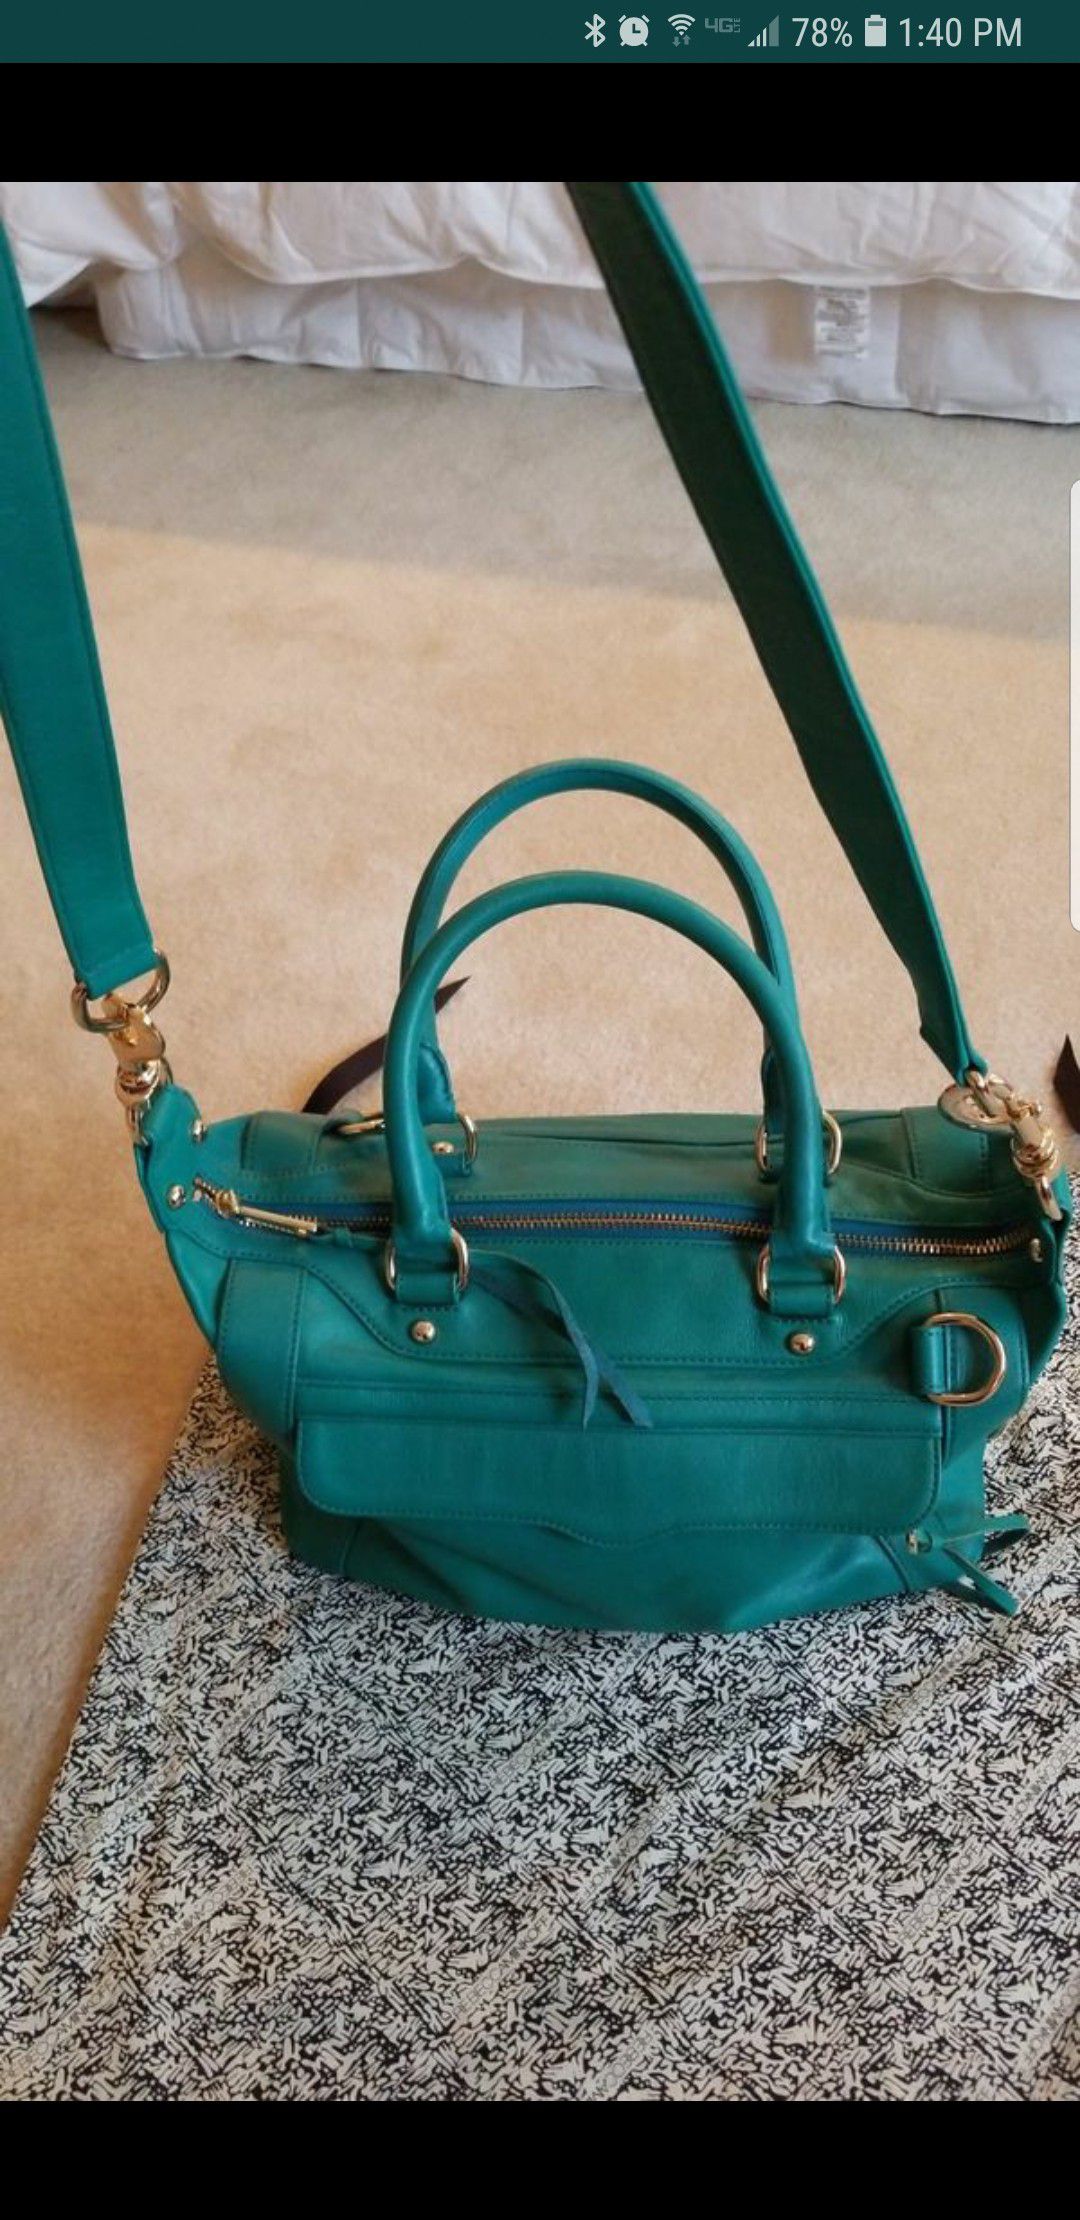 Rebecca Minkoff Embroidered Bag Strap for Sale in Fairfield, CA - OfferUp